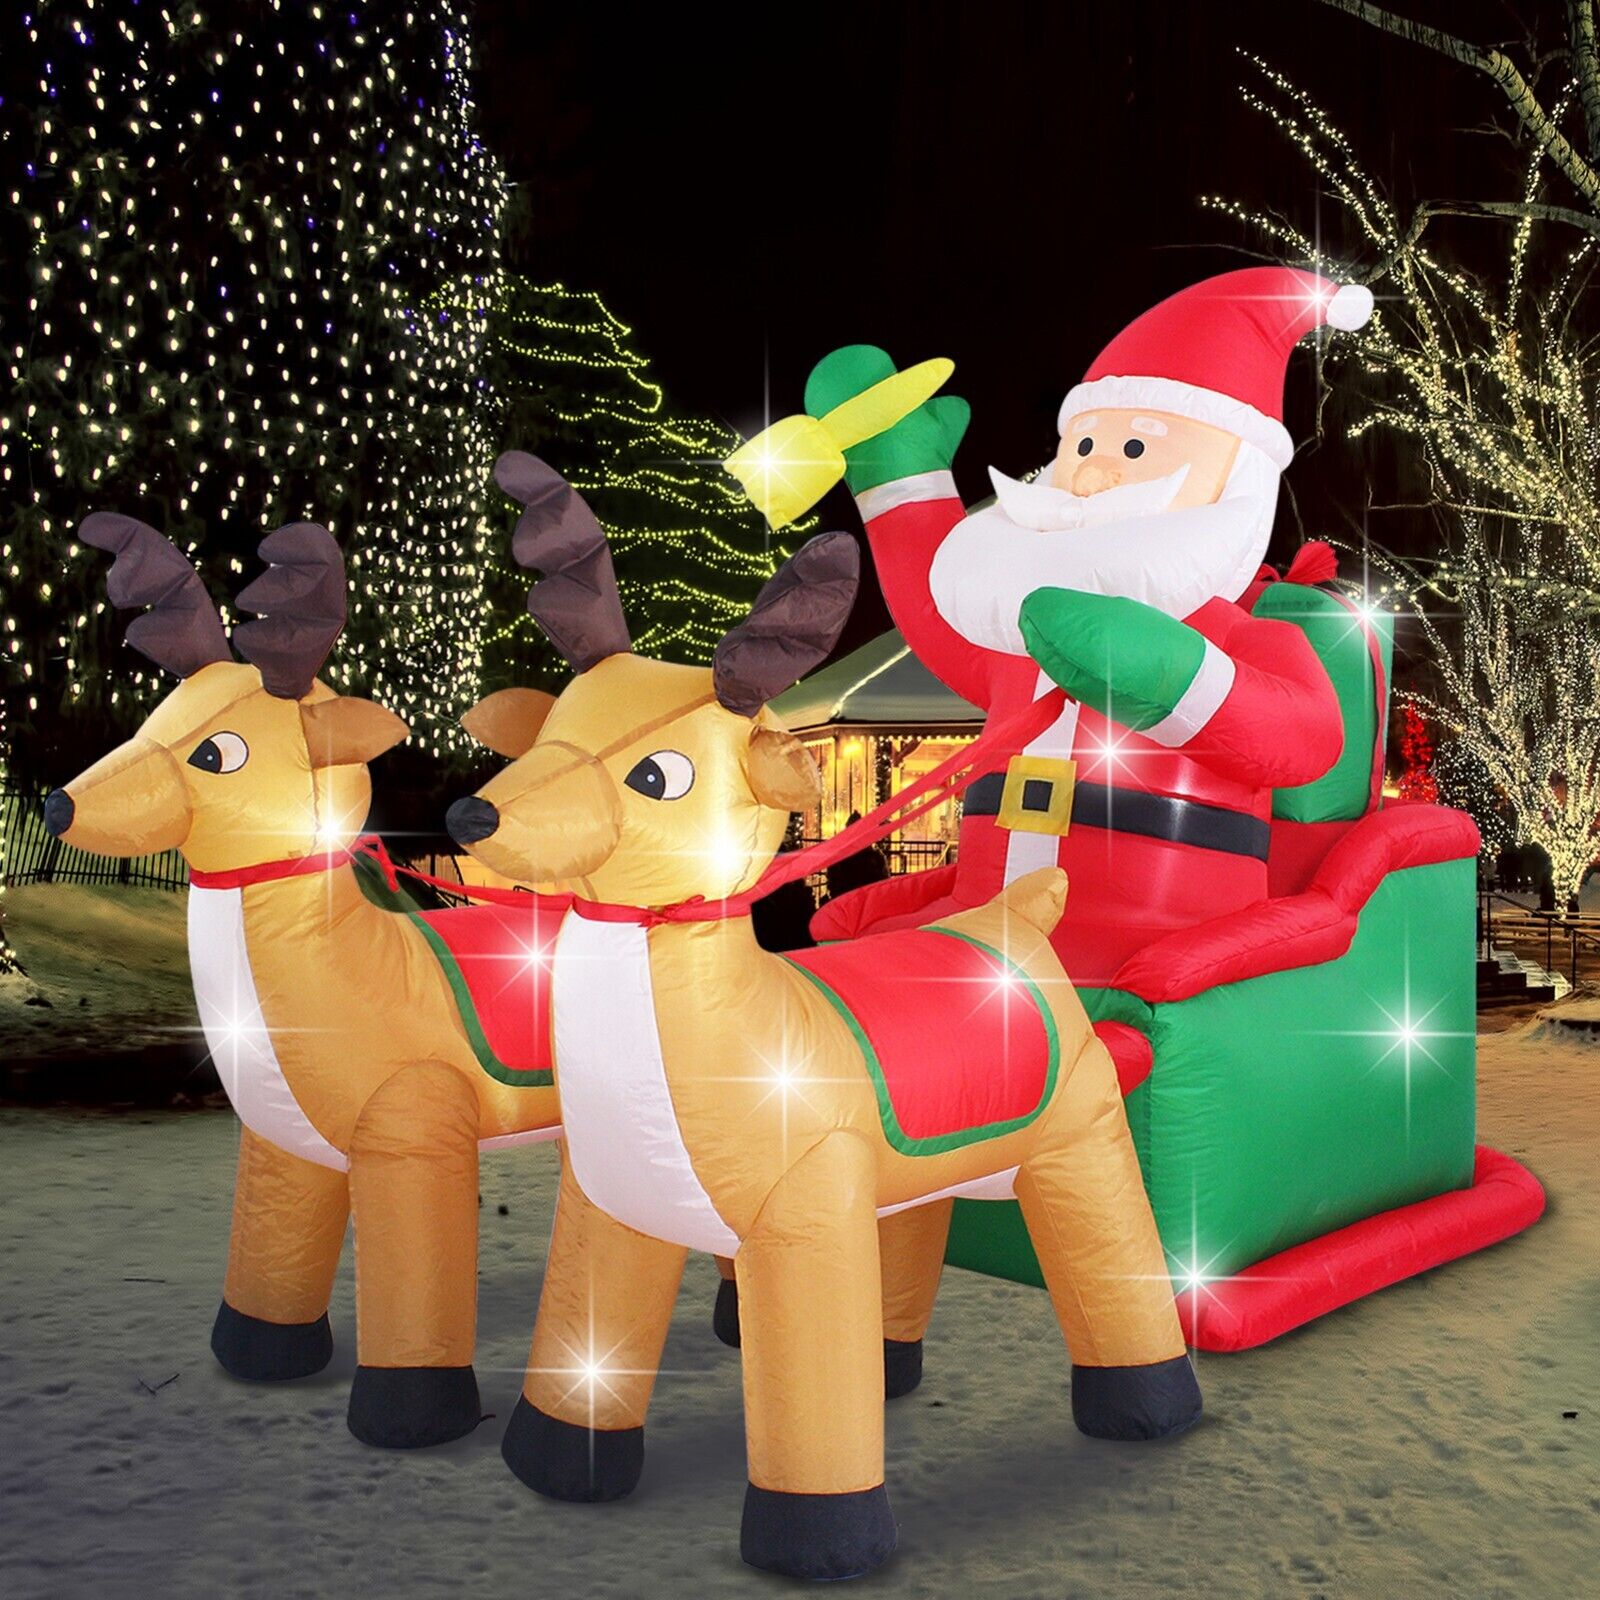 Fanshunlite 8ft Christmas Inflatable Santa Claus on Sleigh with Two Reindeer 